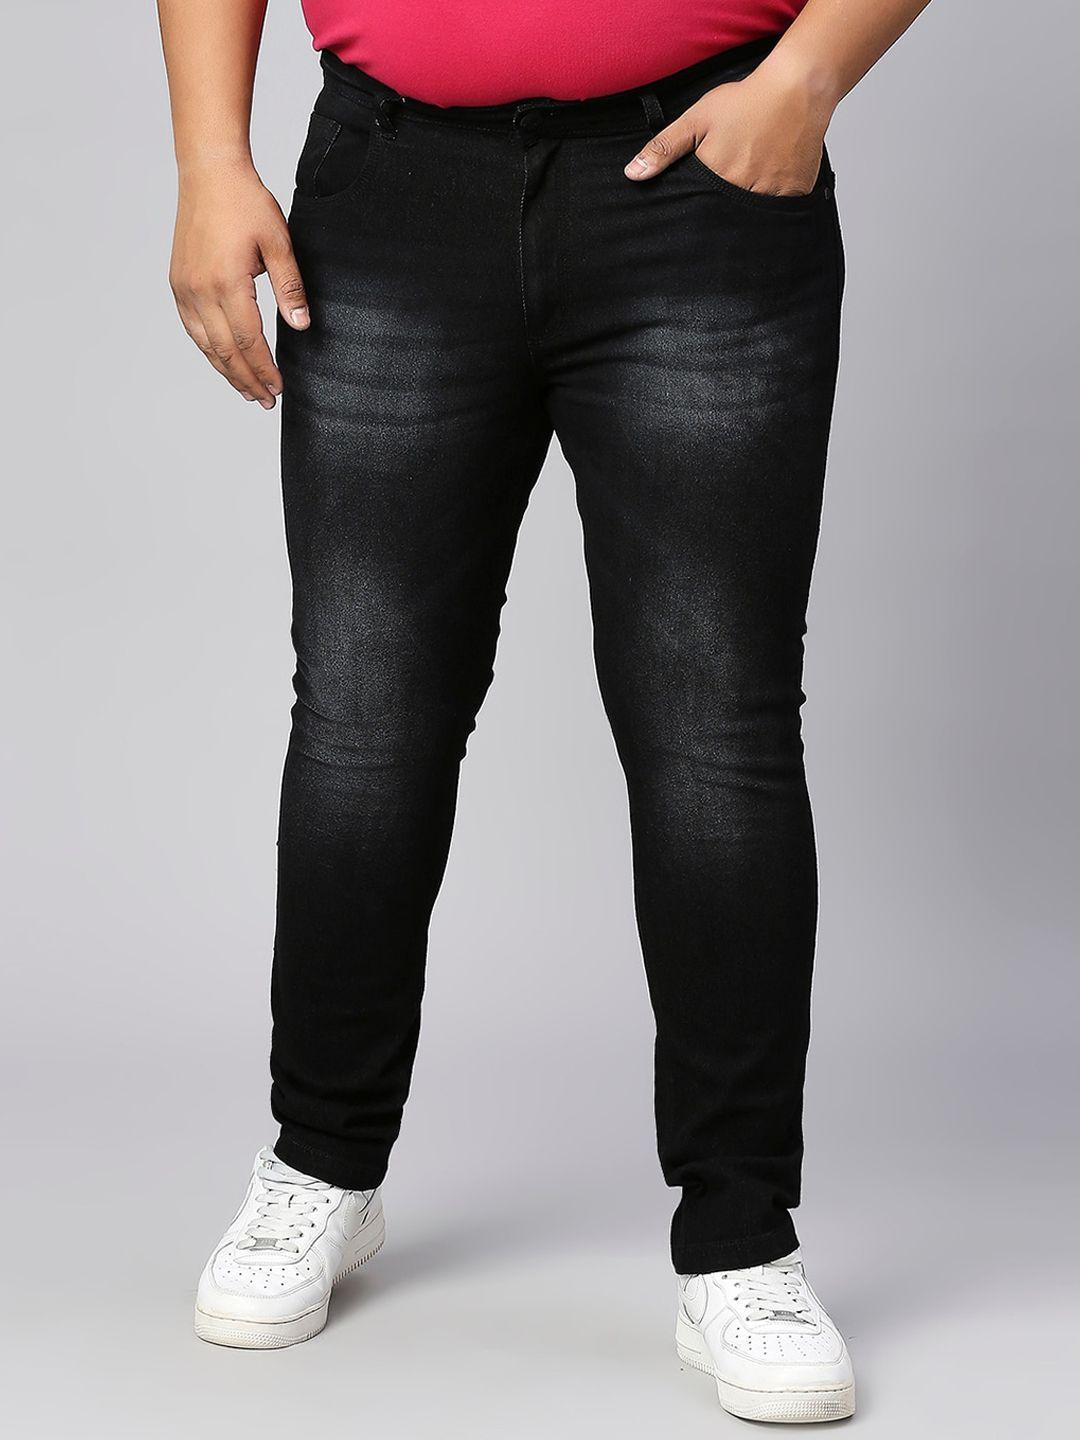 hj-hasasi-men-mid-rise-clean-look-light-fade-whiskers-stretchable-jeans